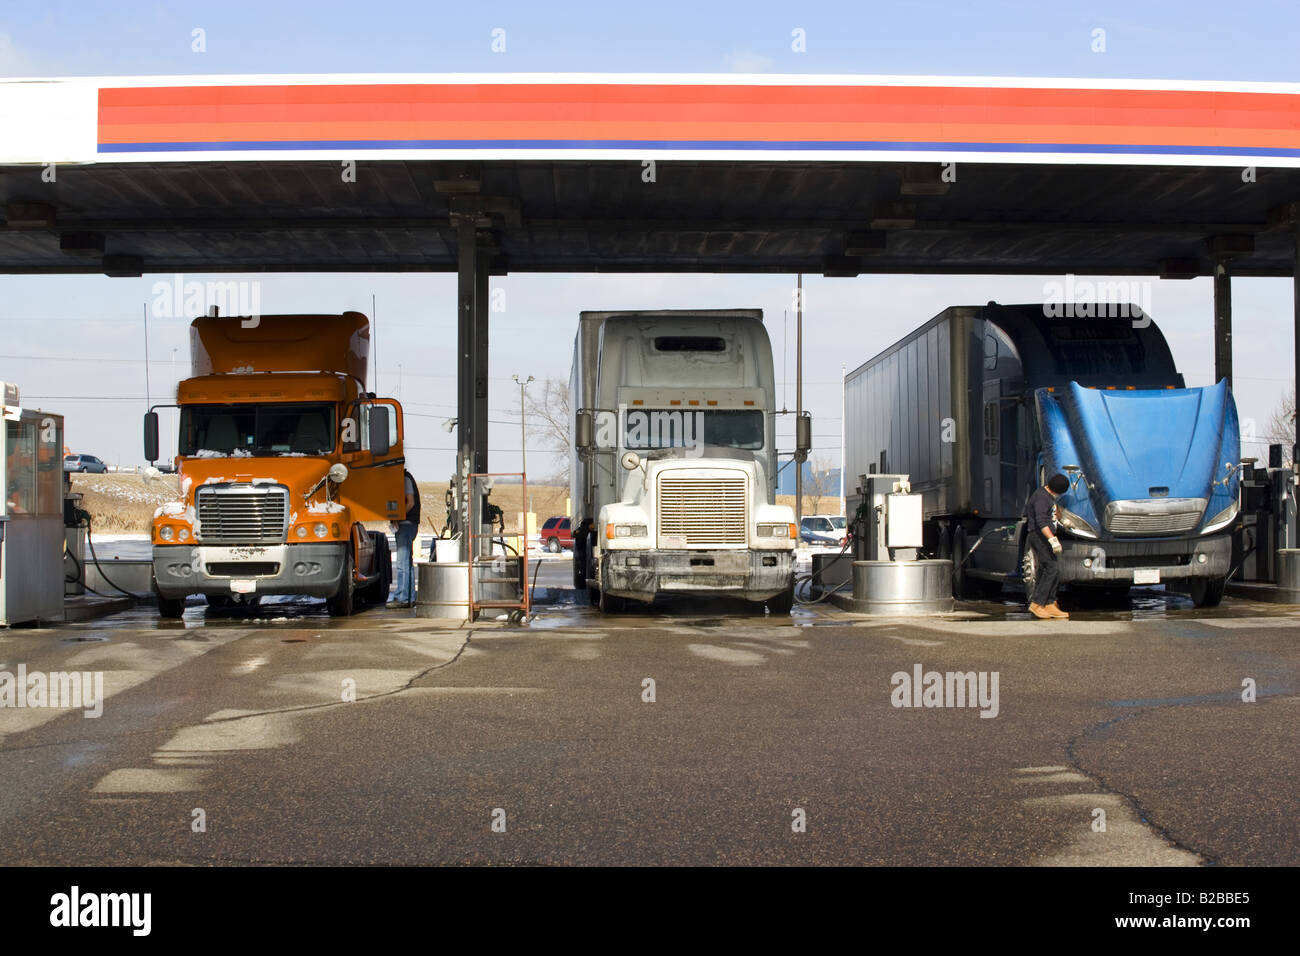 Three trucks filling up with gas at Citgo service station Stock Photo